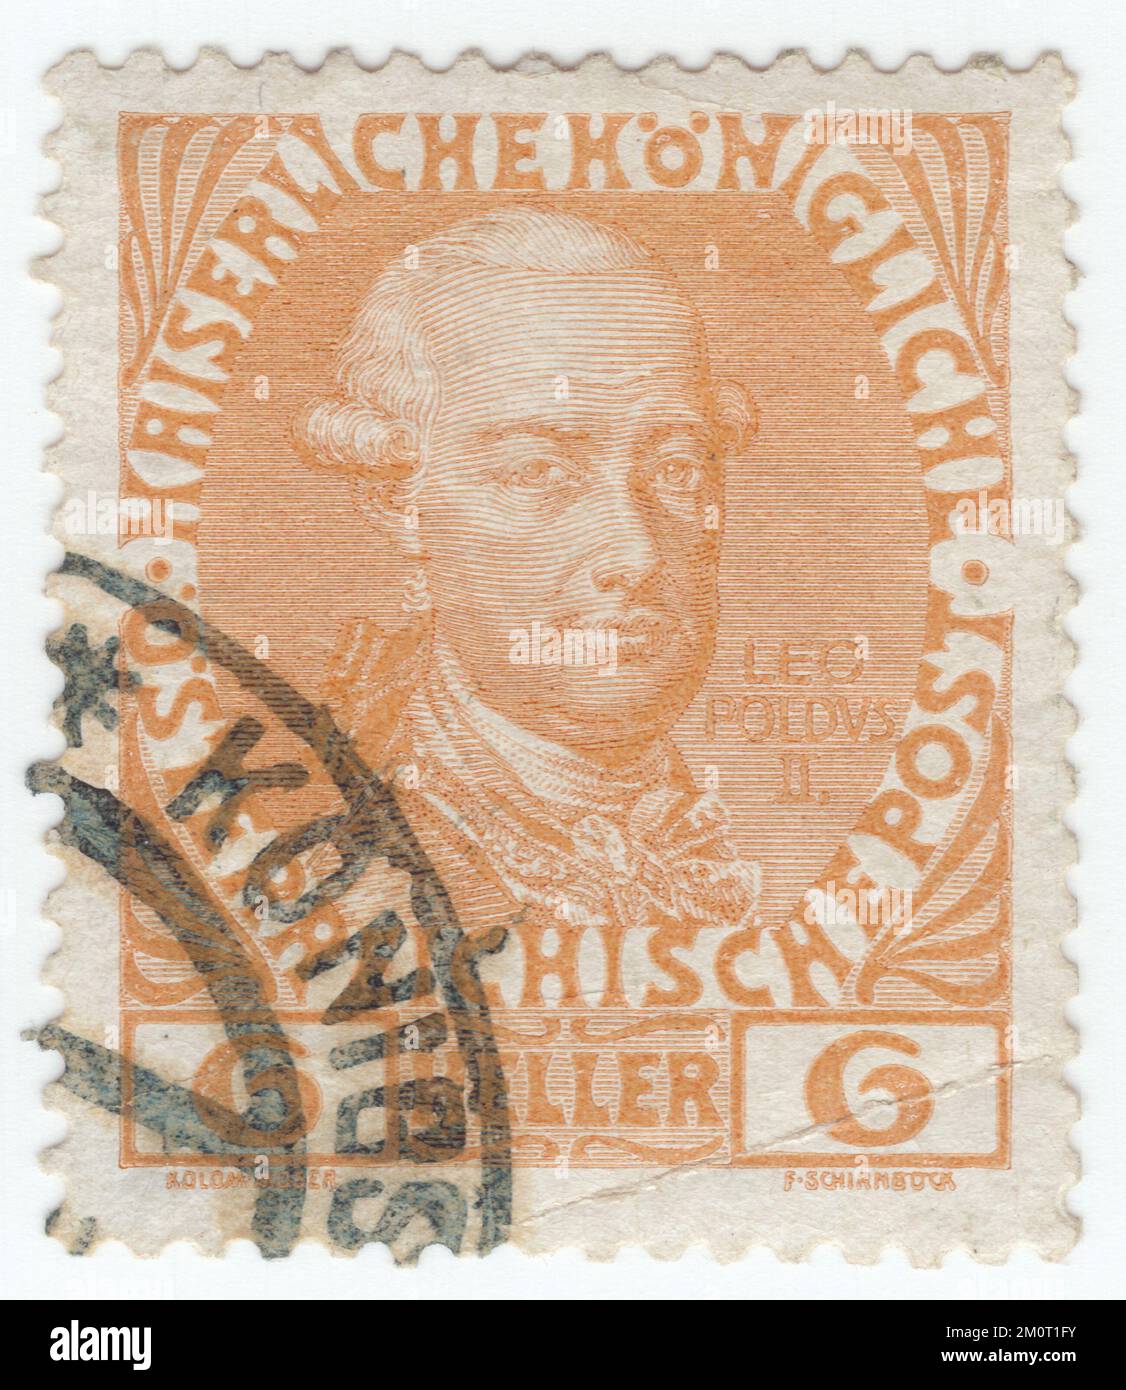 AUSTRIA — 1908: An 6 heller buff postage stamp depicting portrait of Leopold II. Definitive set issued for the 60th year of the reign of Austrian Monarch Franz Josef, Emperor of Austria, King of Hungary, and the other states of the Habsburg monarchy. Leopold II (Peter Leopold Josef Anton Joachim Pius) was Holy Roman Emperor, King of Hungary and Bohemia, and Archduke of Austria from 1790 to 1792, and Grand Duke of Tuscany from 1765 to 1790.[1] He was a son of Empress Maria Theresa and her husband, Emperor Francis I, and the brother of Marie Antoinette, Queen of France Stock Photo